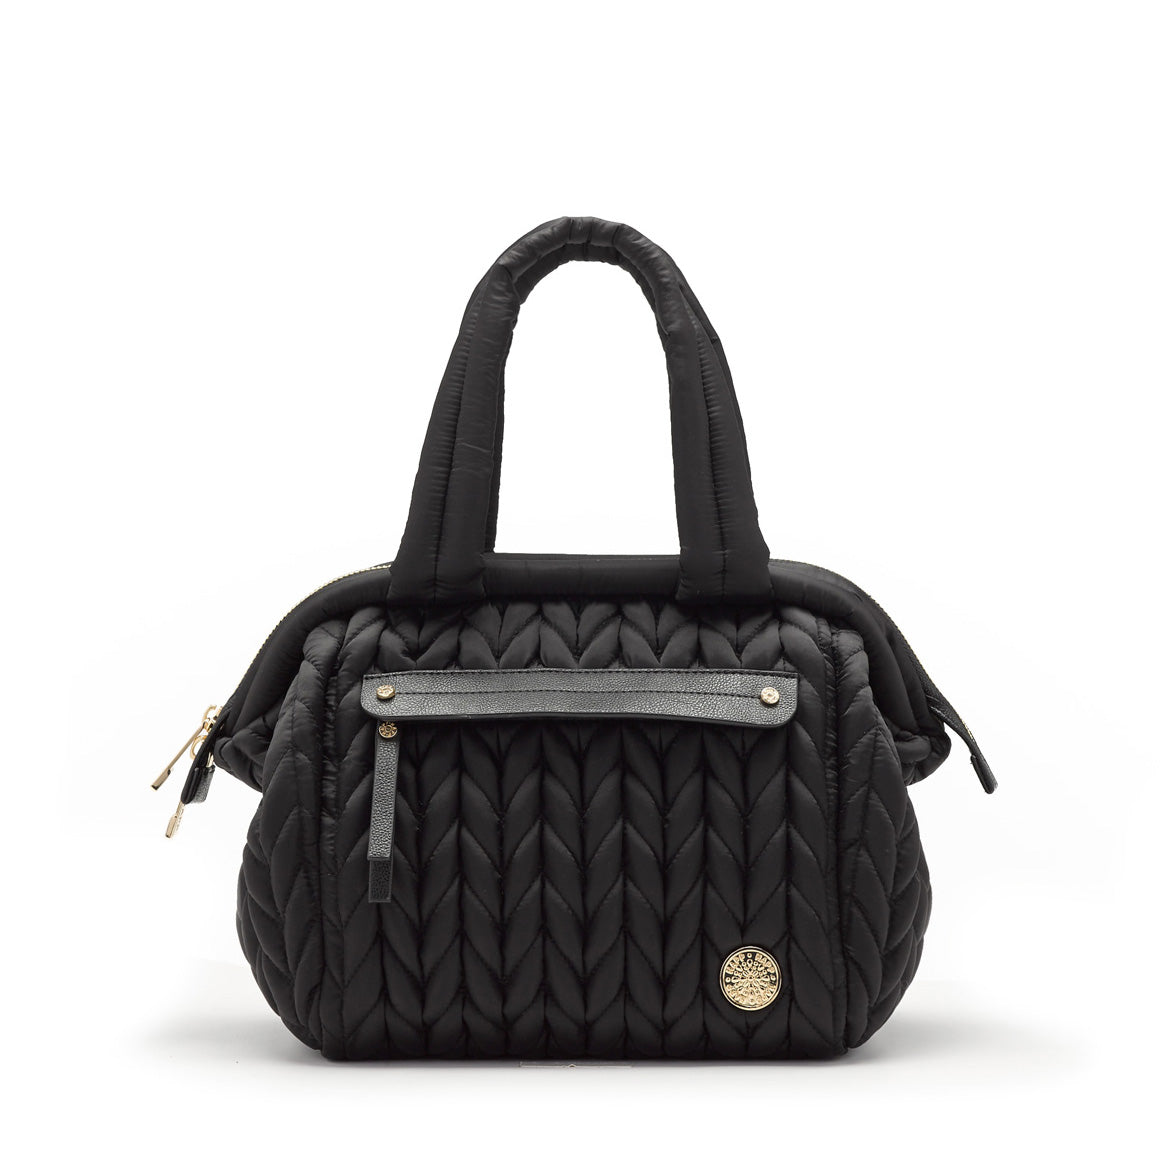 Paige mini purse small handbag style diaper bag in classic black quilted herringbone nylon with gold hardware